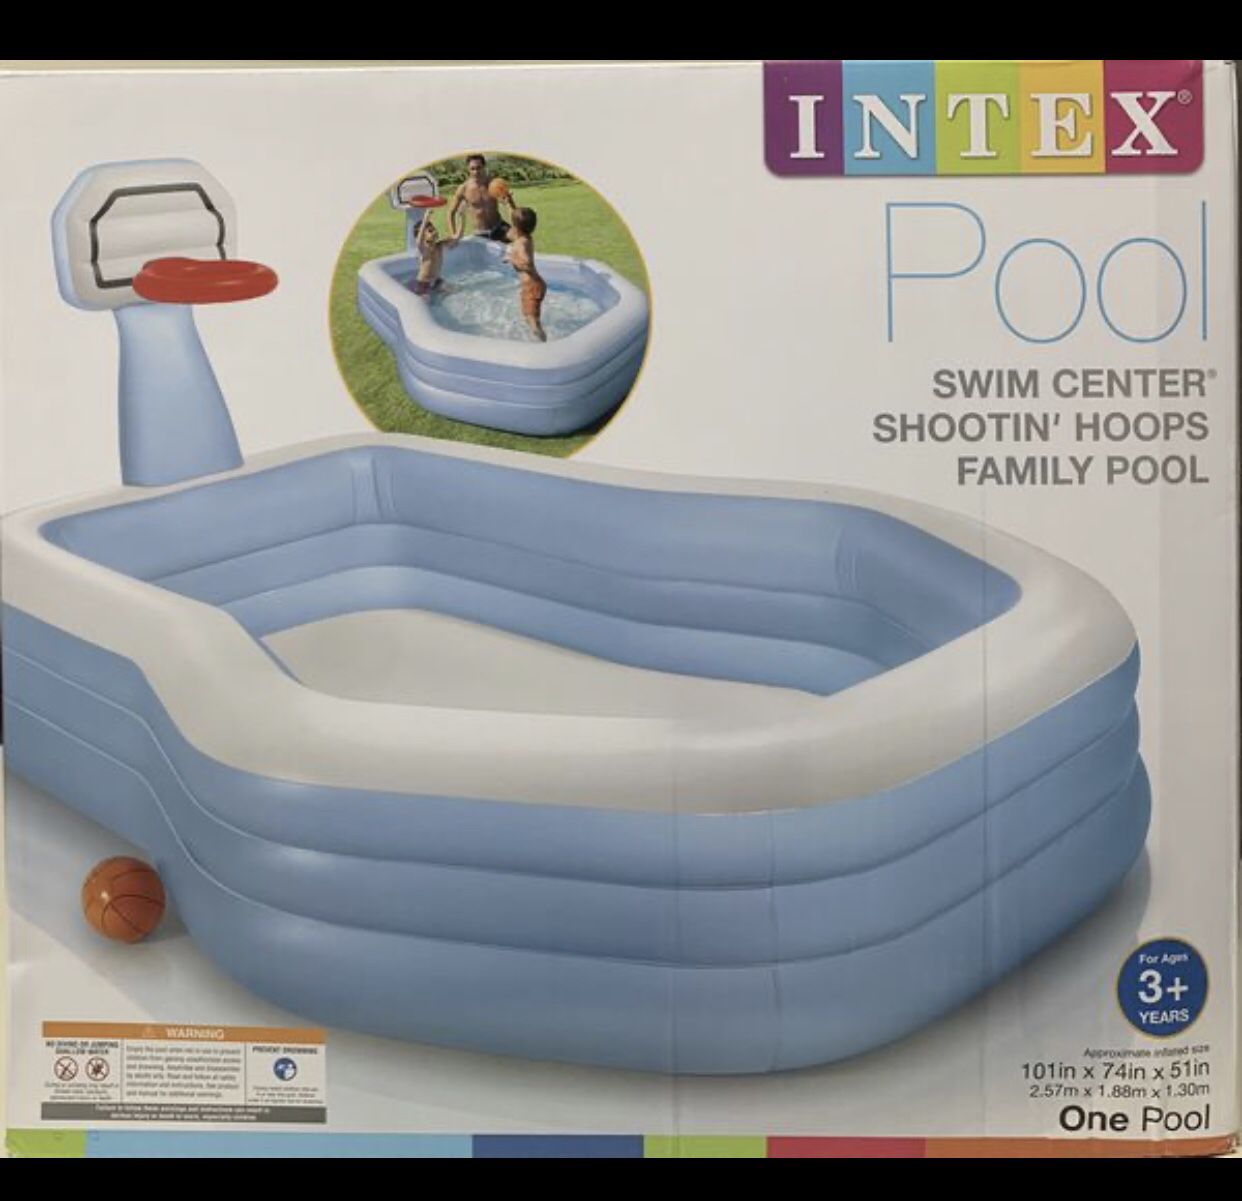 BRAND NEW IN BOX 9 FT INTEX SWIM CENTER SHOOTIN HOOPS!!!!! DELIVERY AVAILABLE SAME DAY!